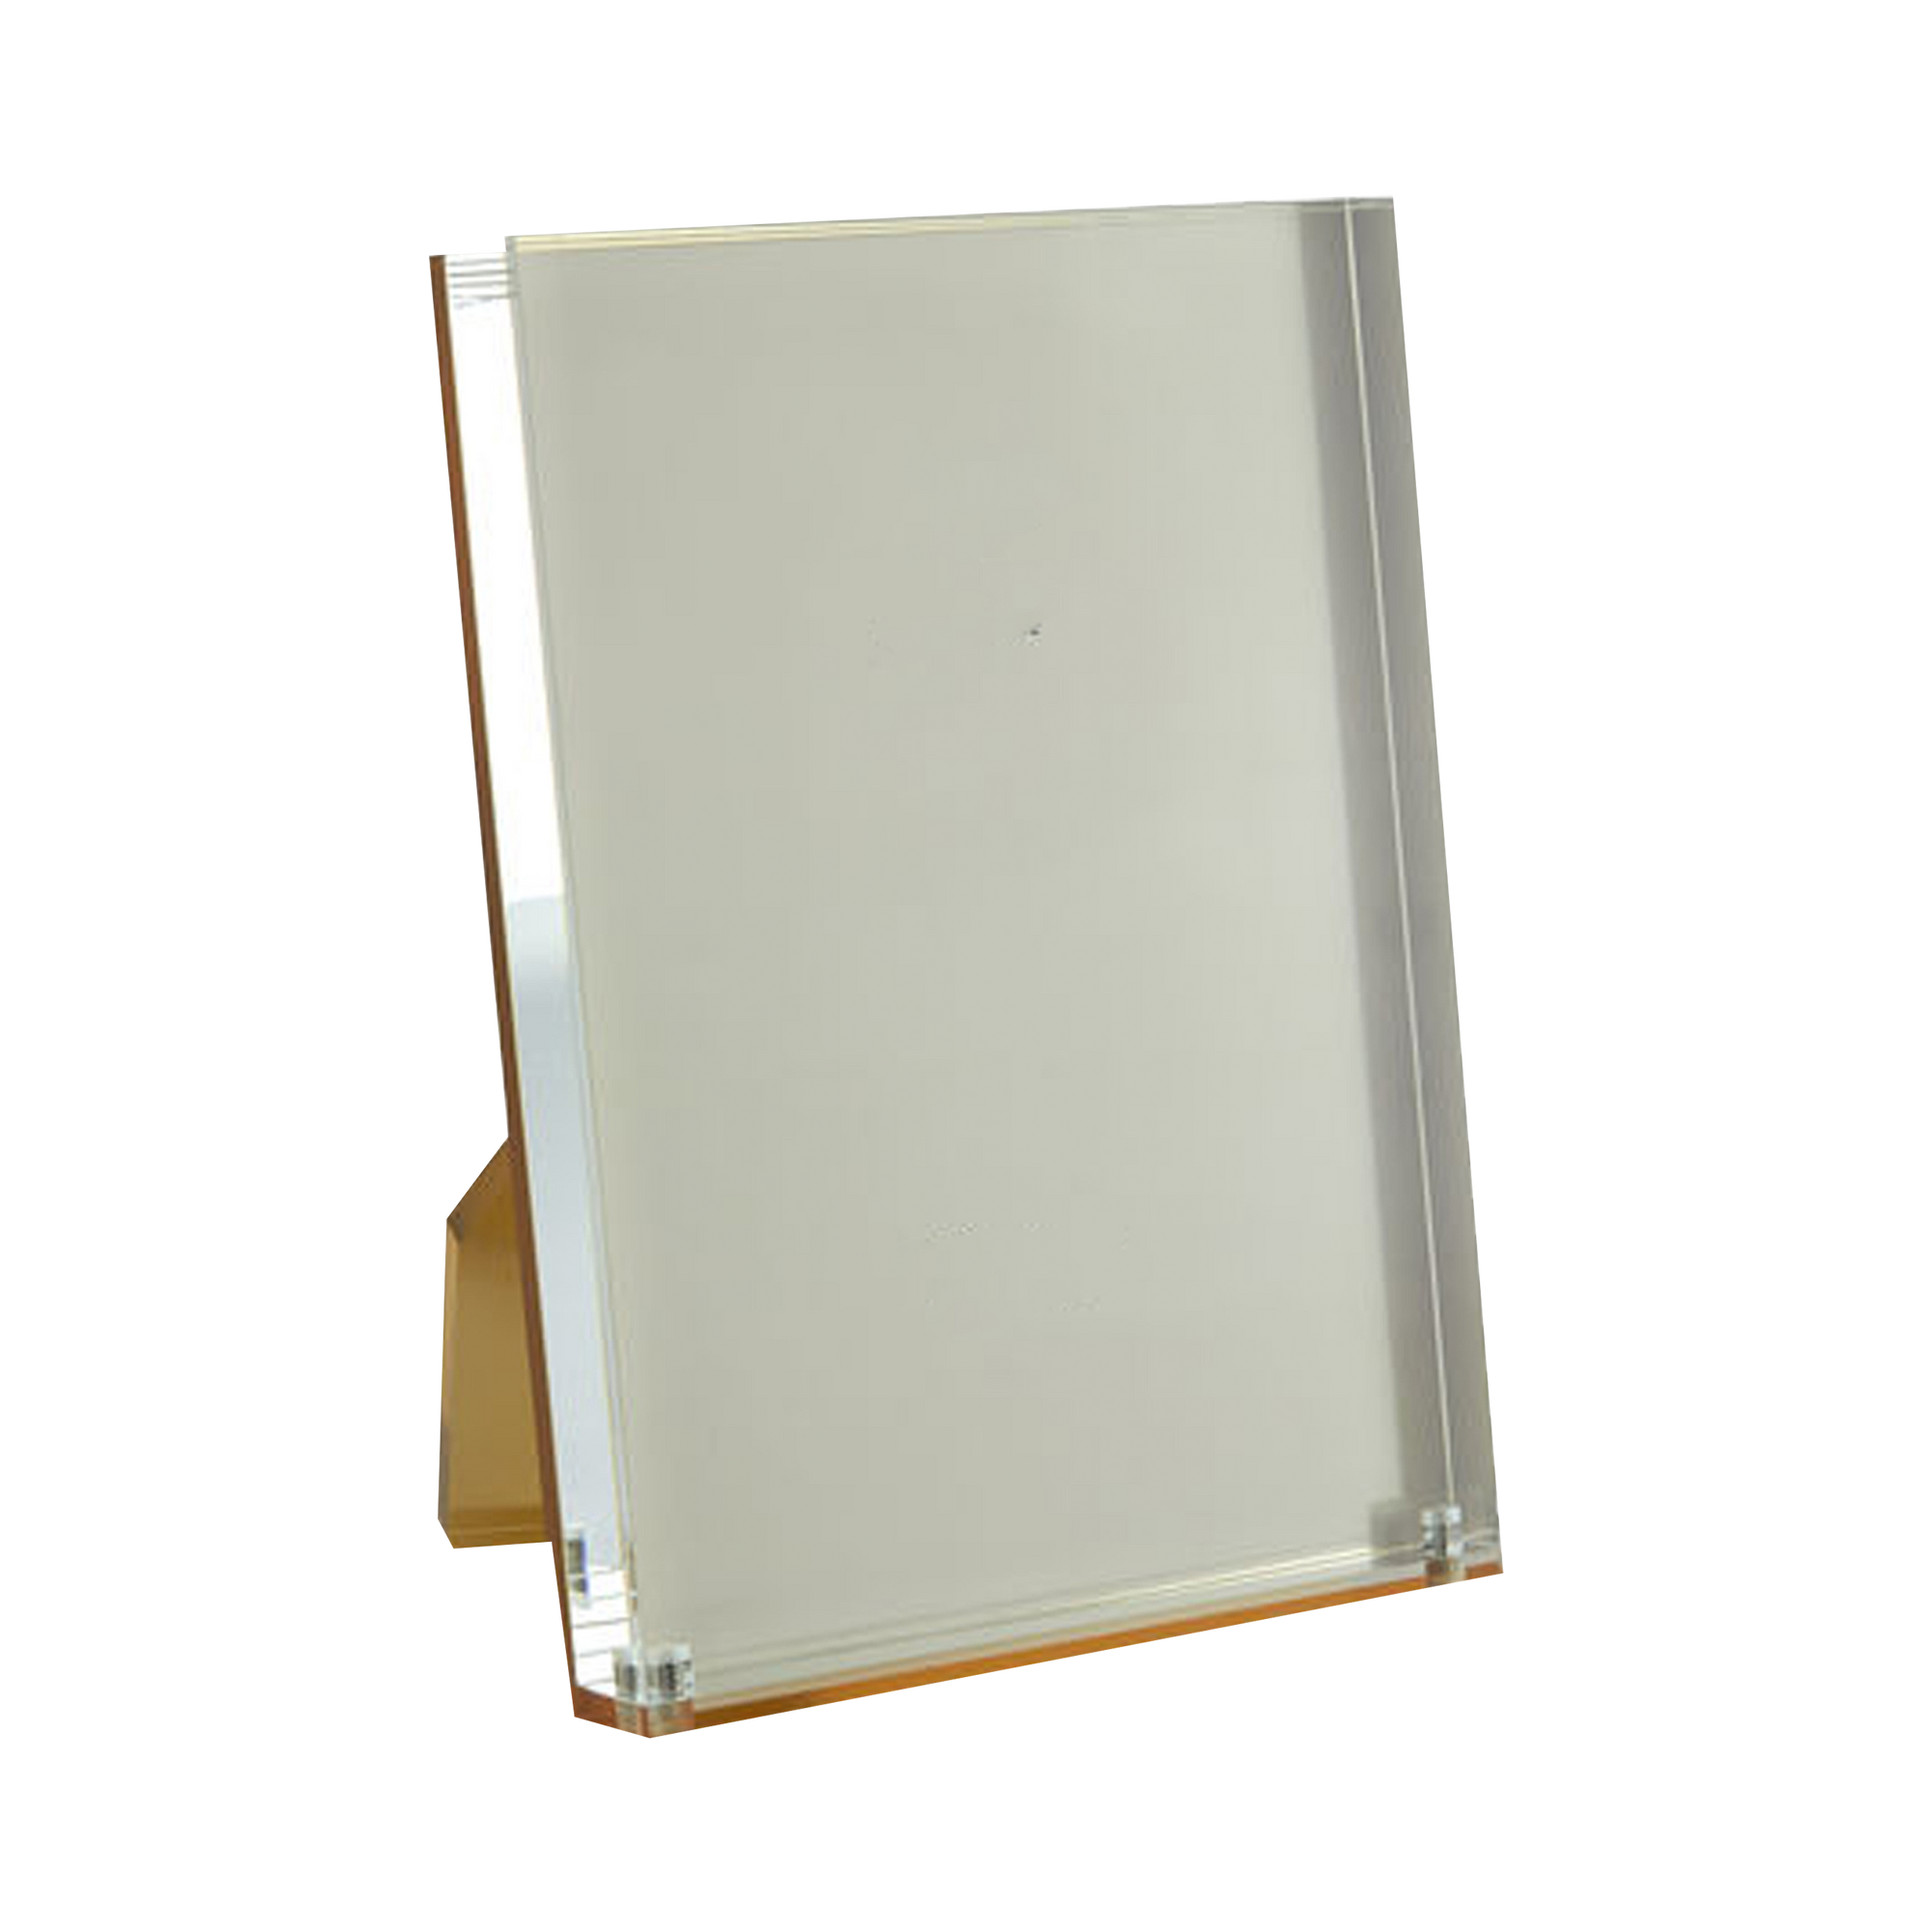 Acrylic picture frame with gold backing that will add stylish flair to any setting.